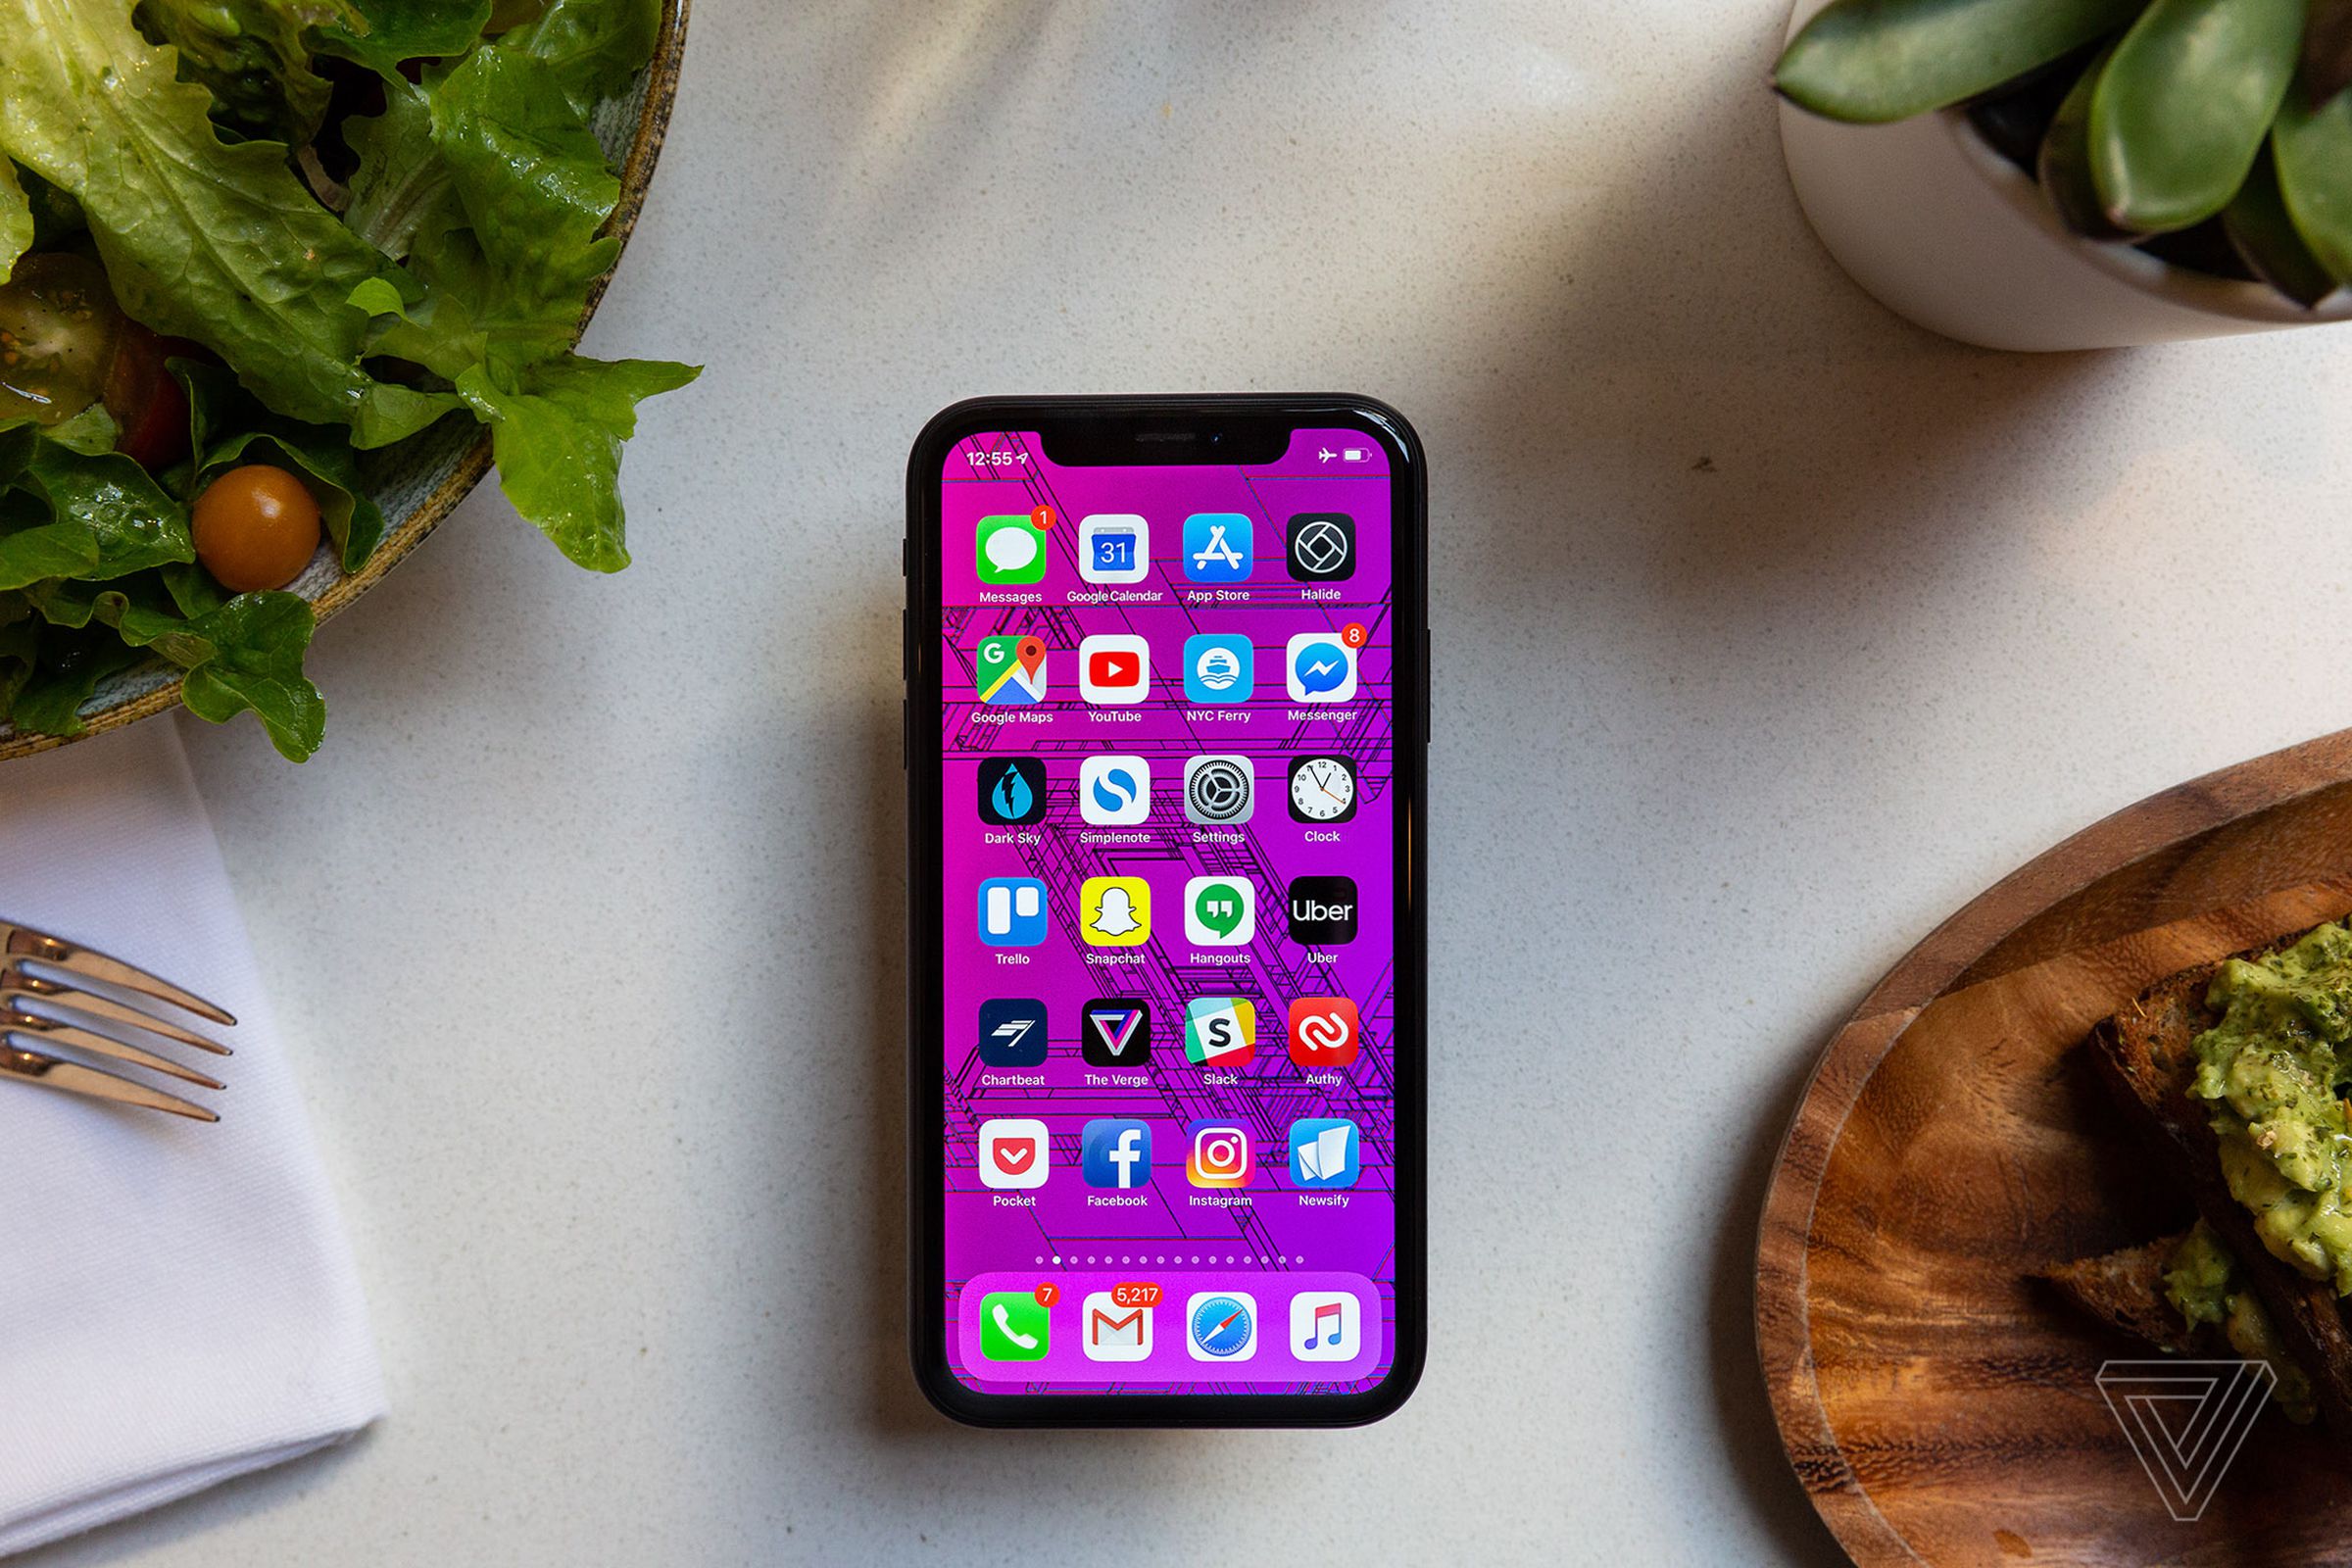 The latest version of Apple’s mobile operating system will be iOS 13. 